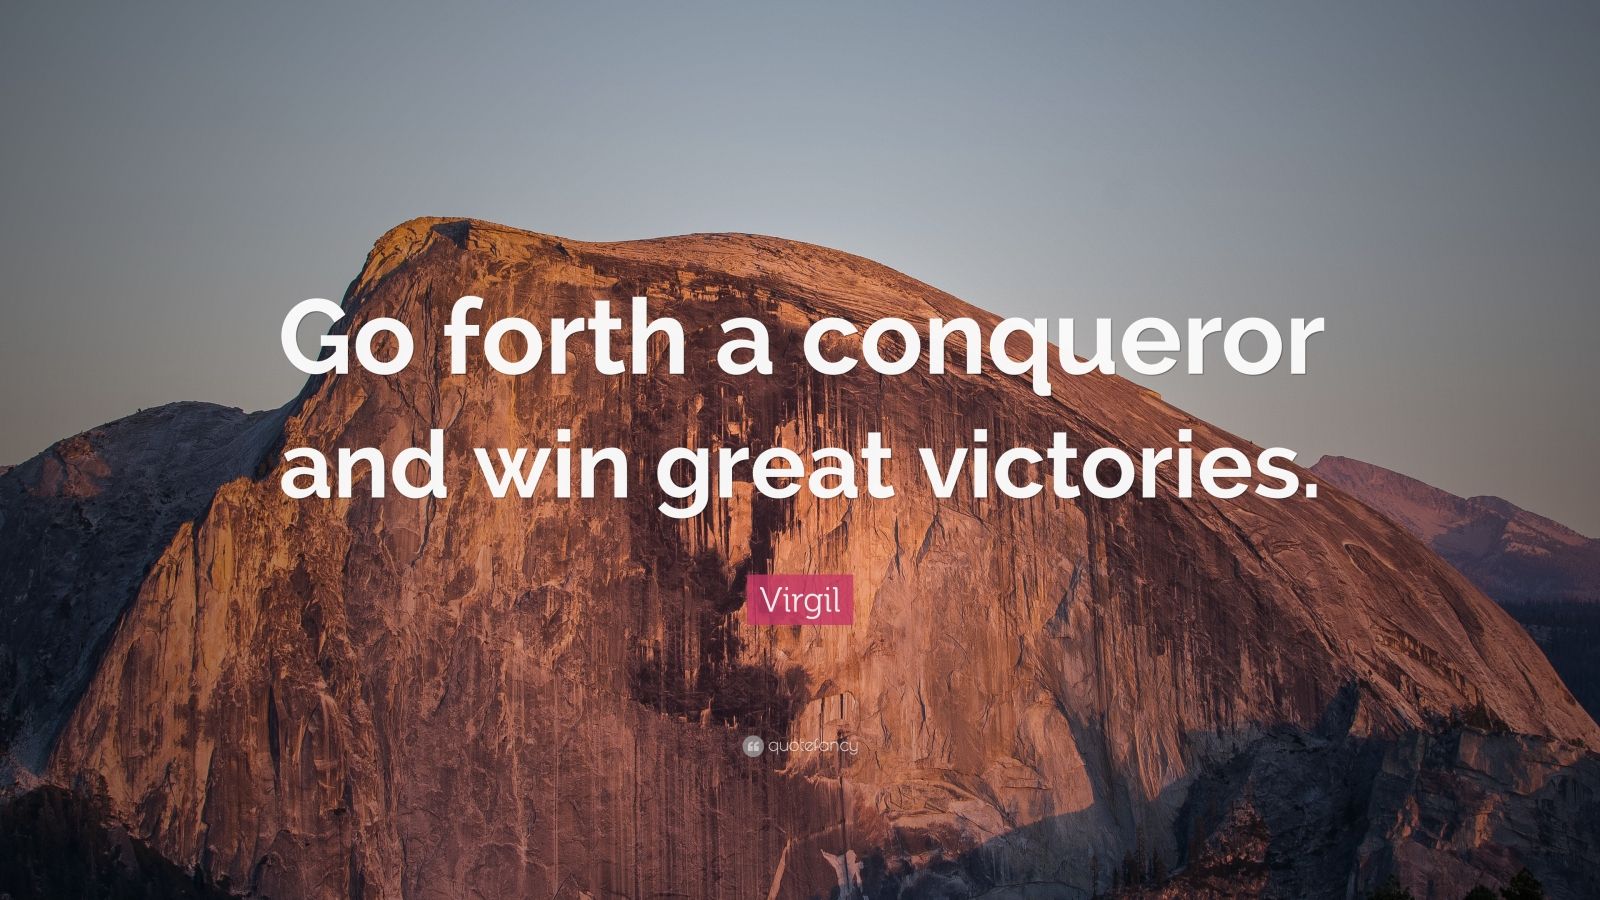 go forth and conquer quote